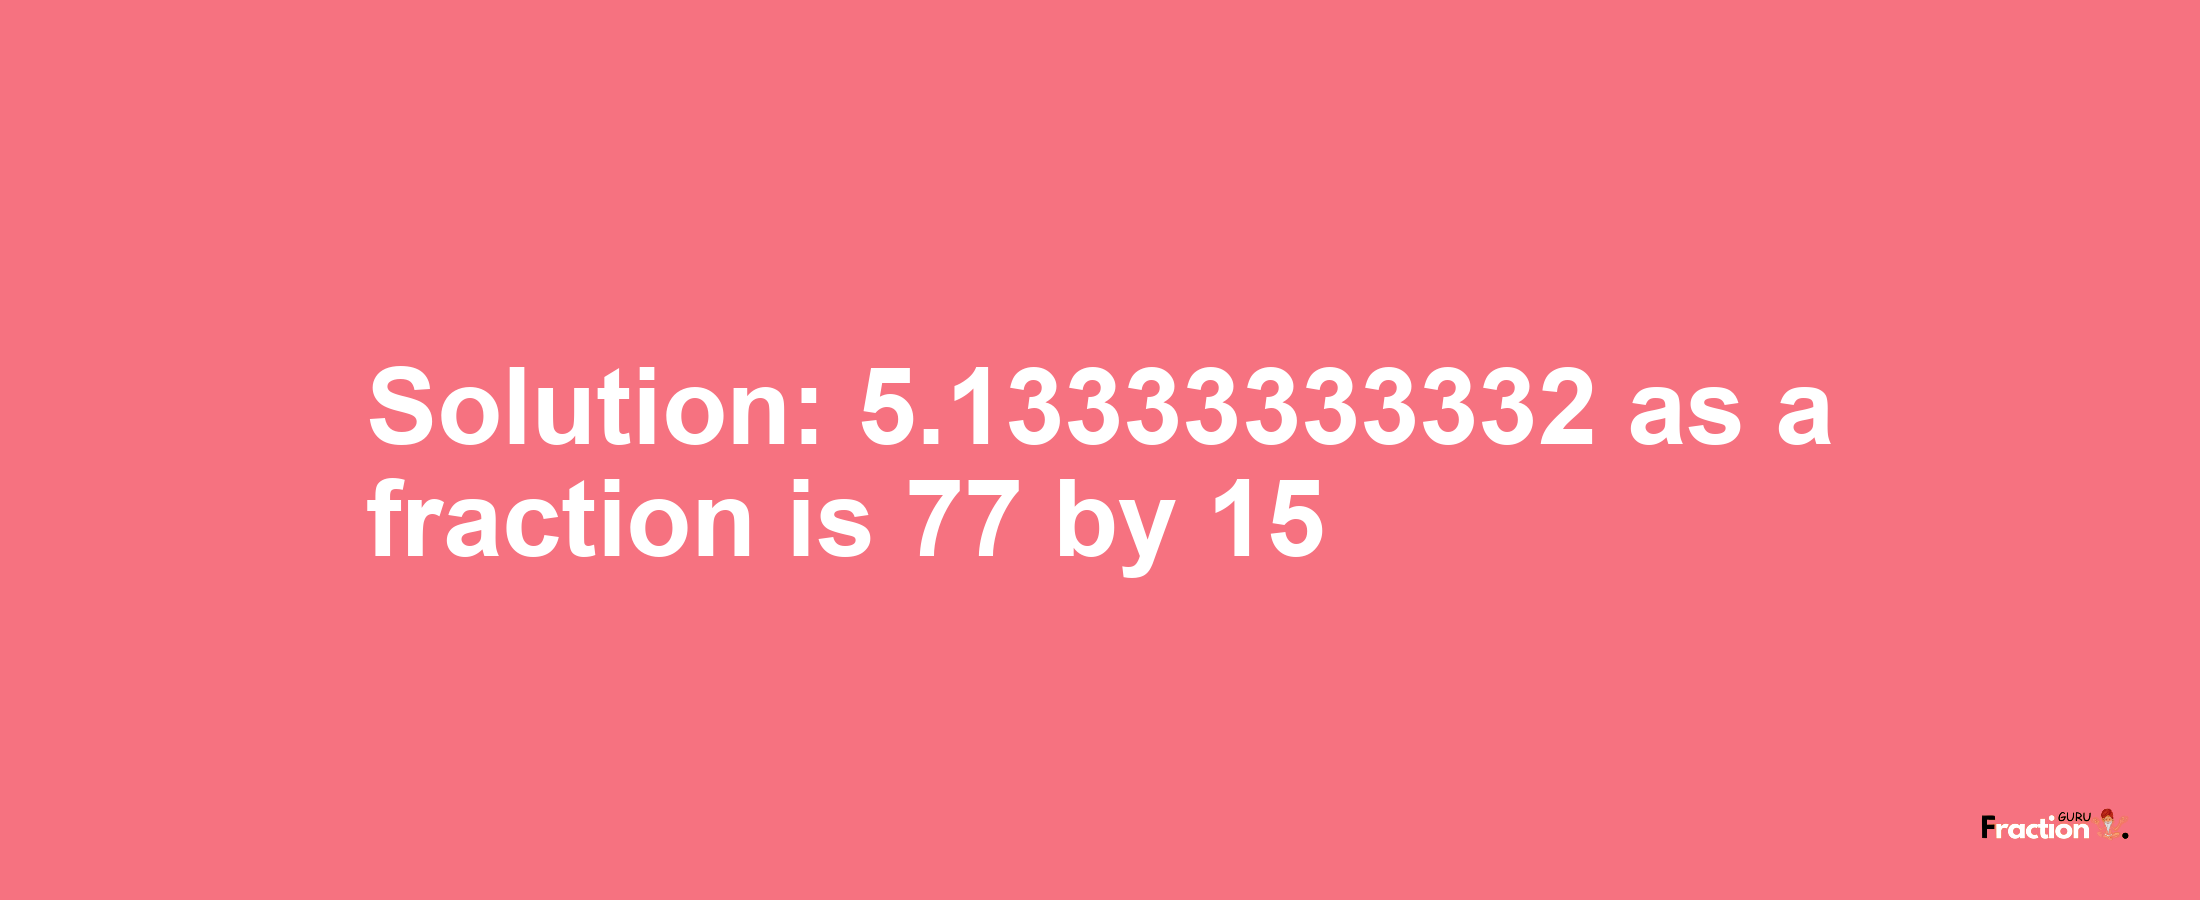 Solution:5.13333333332 as a fraction is 77/15